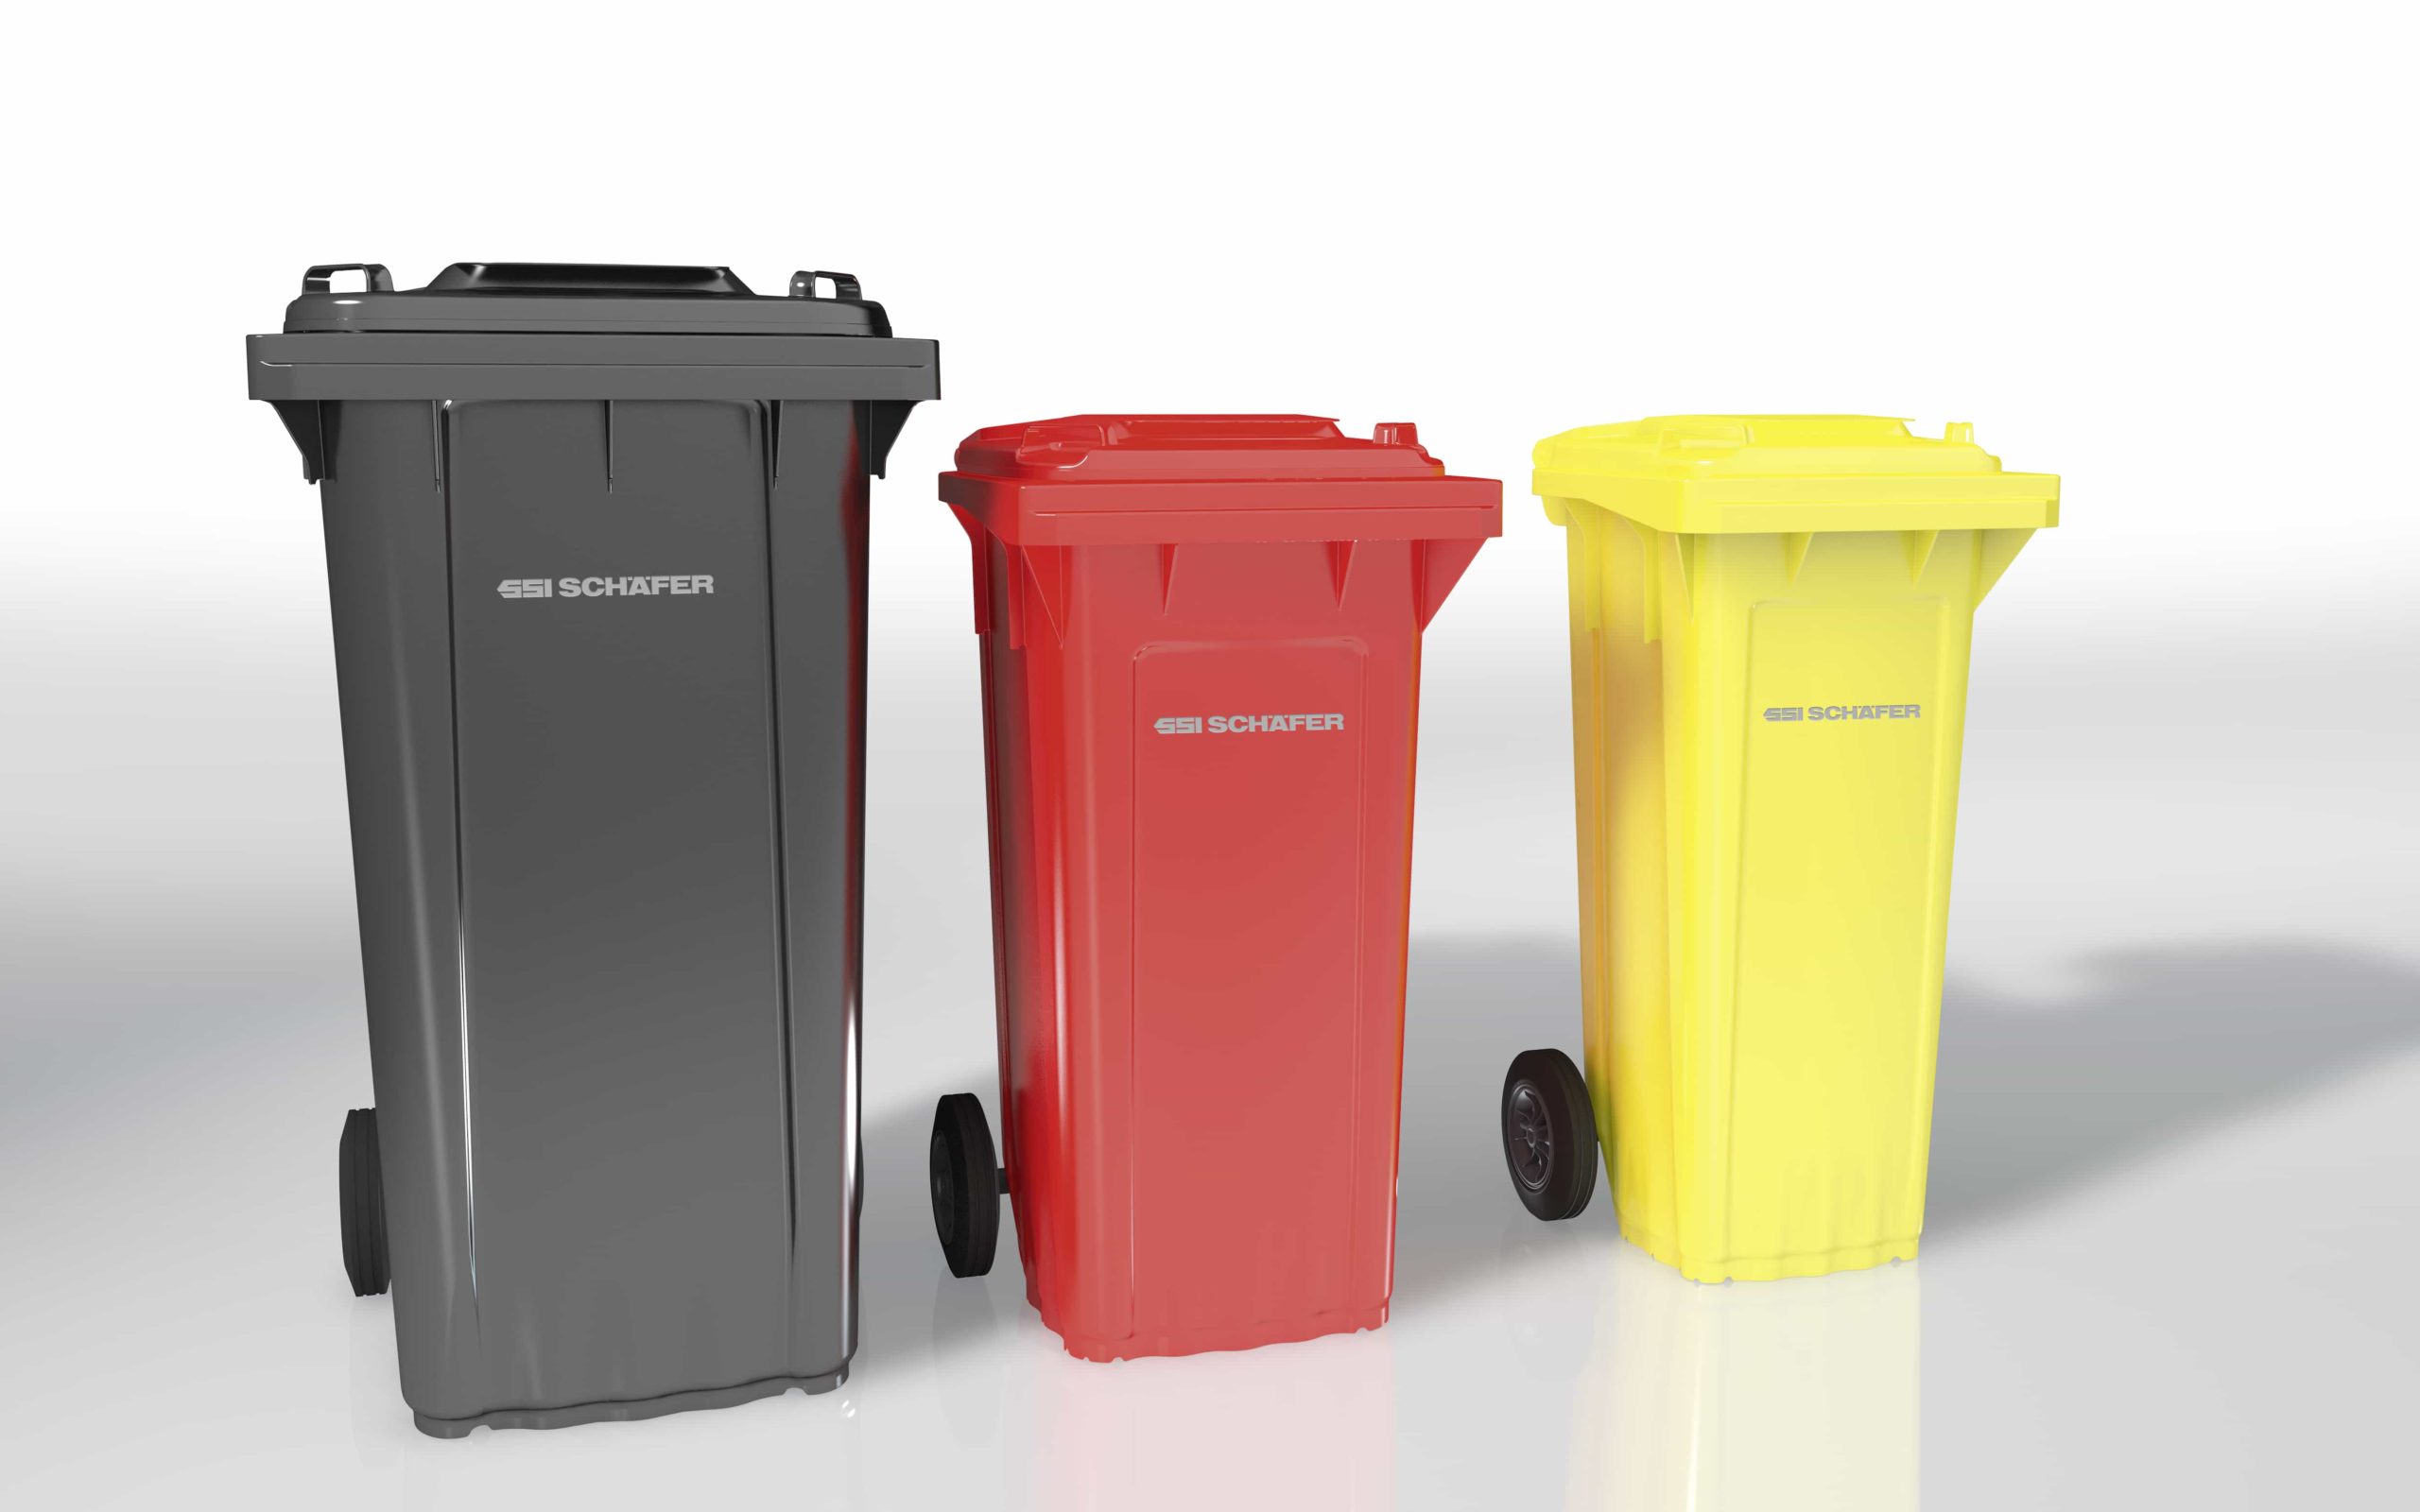 SSI Schäfer's Pro Wave containers are available in 240l, 120l and 80l options